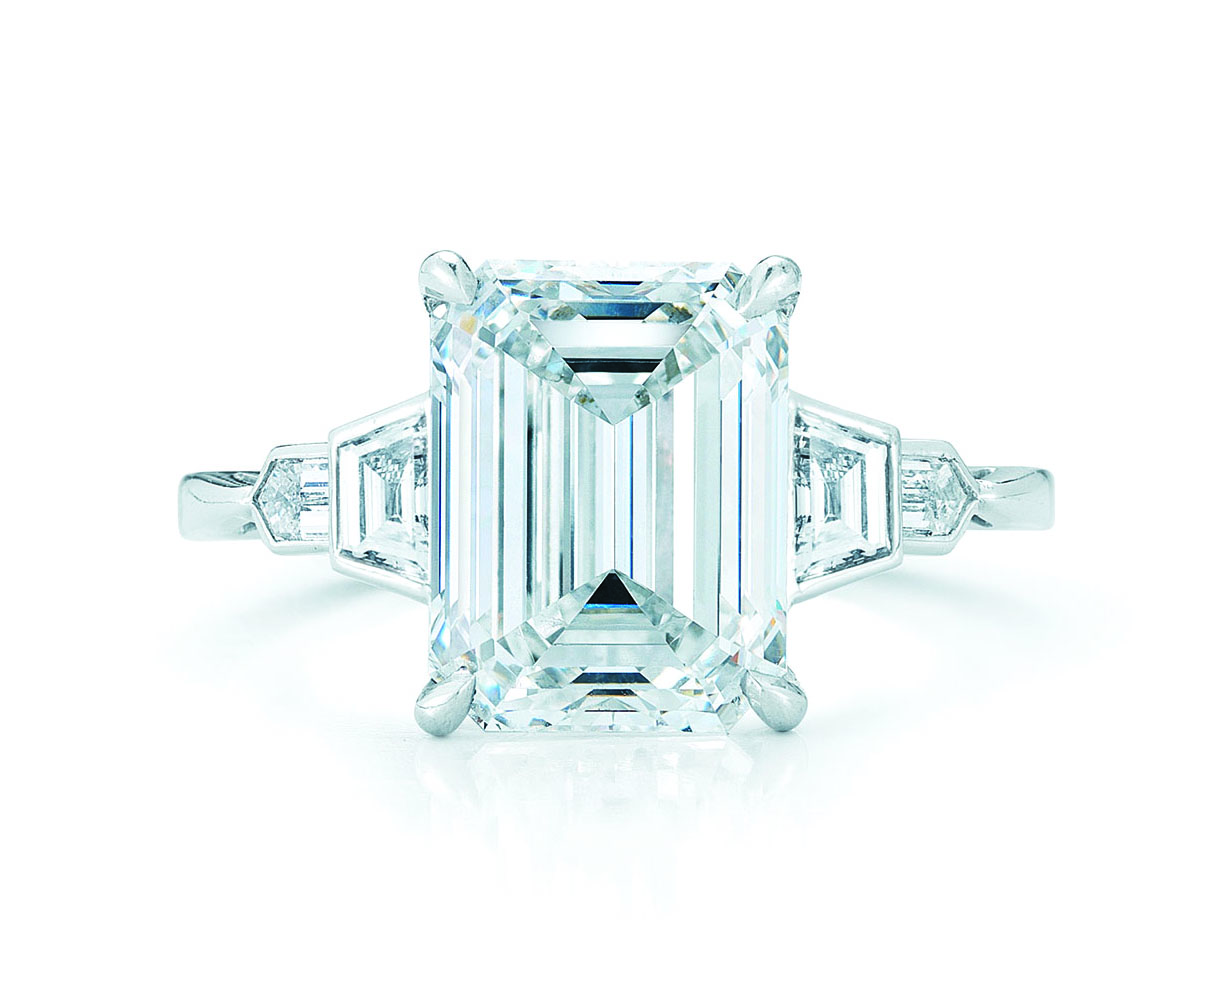 Emerald cut diamond ring with trapezoid side stones in art deco style with a white gold band